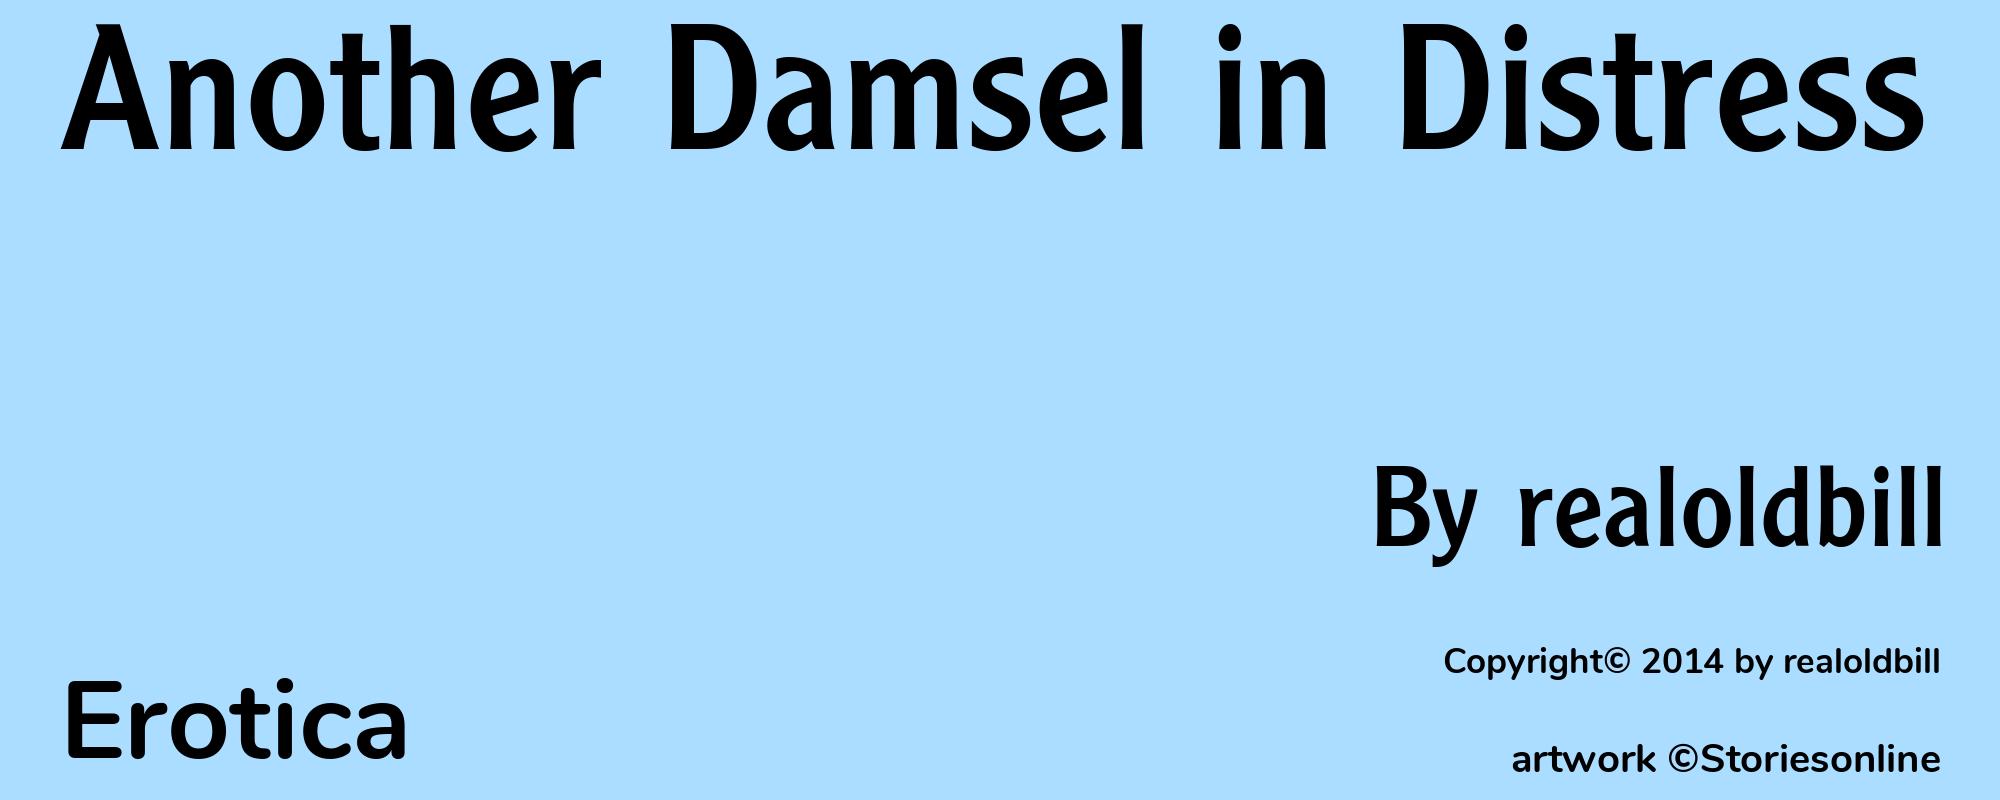 Another Damsel in Distress - Cover